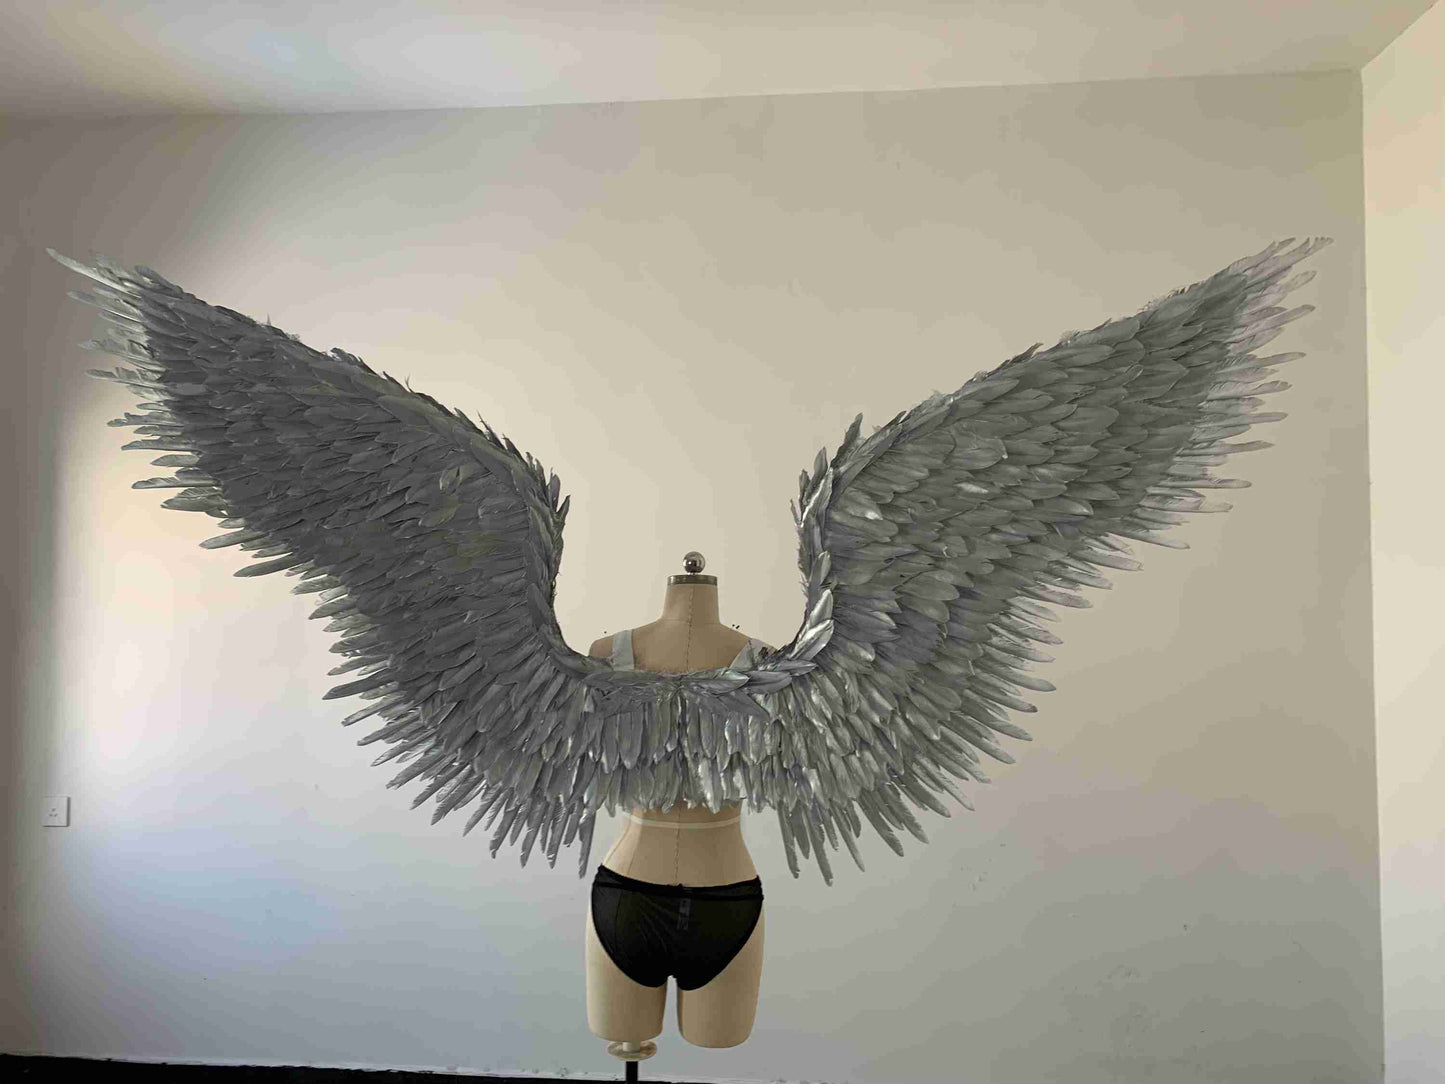 Our silver color angel wings from the back. Made from goose feathers. Wings for angel costume or devil costume. Suitable for photoshoots.